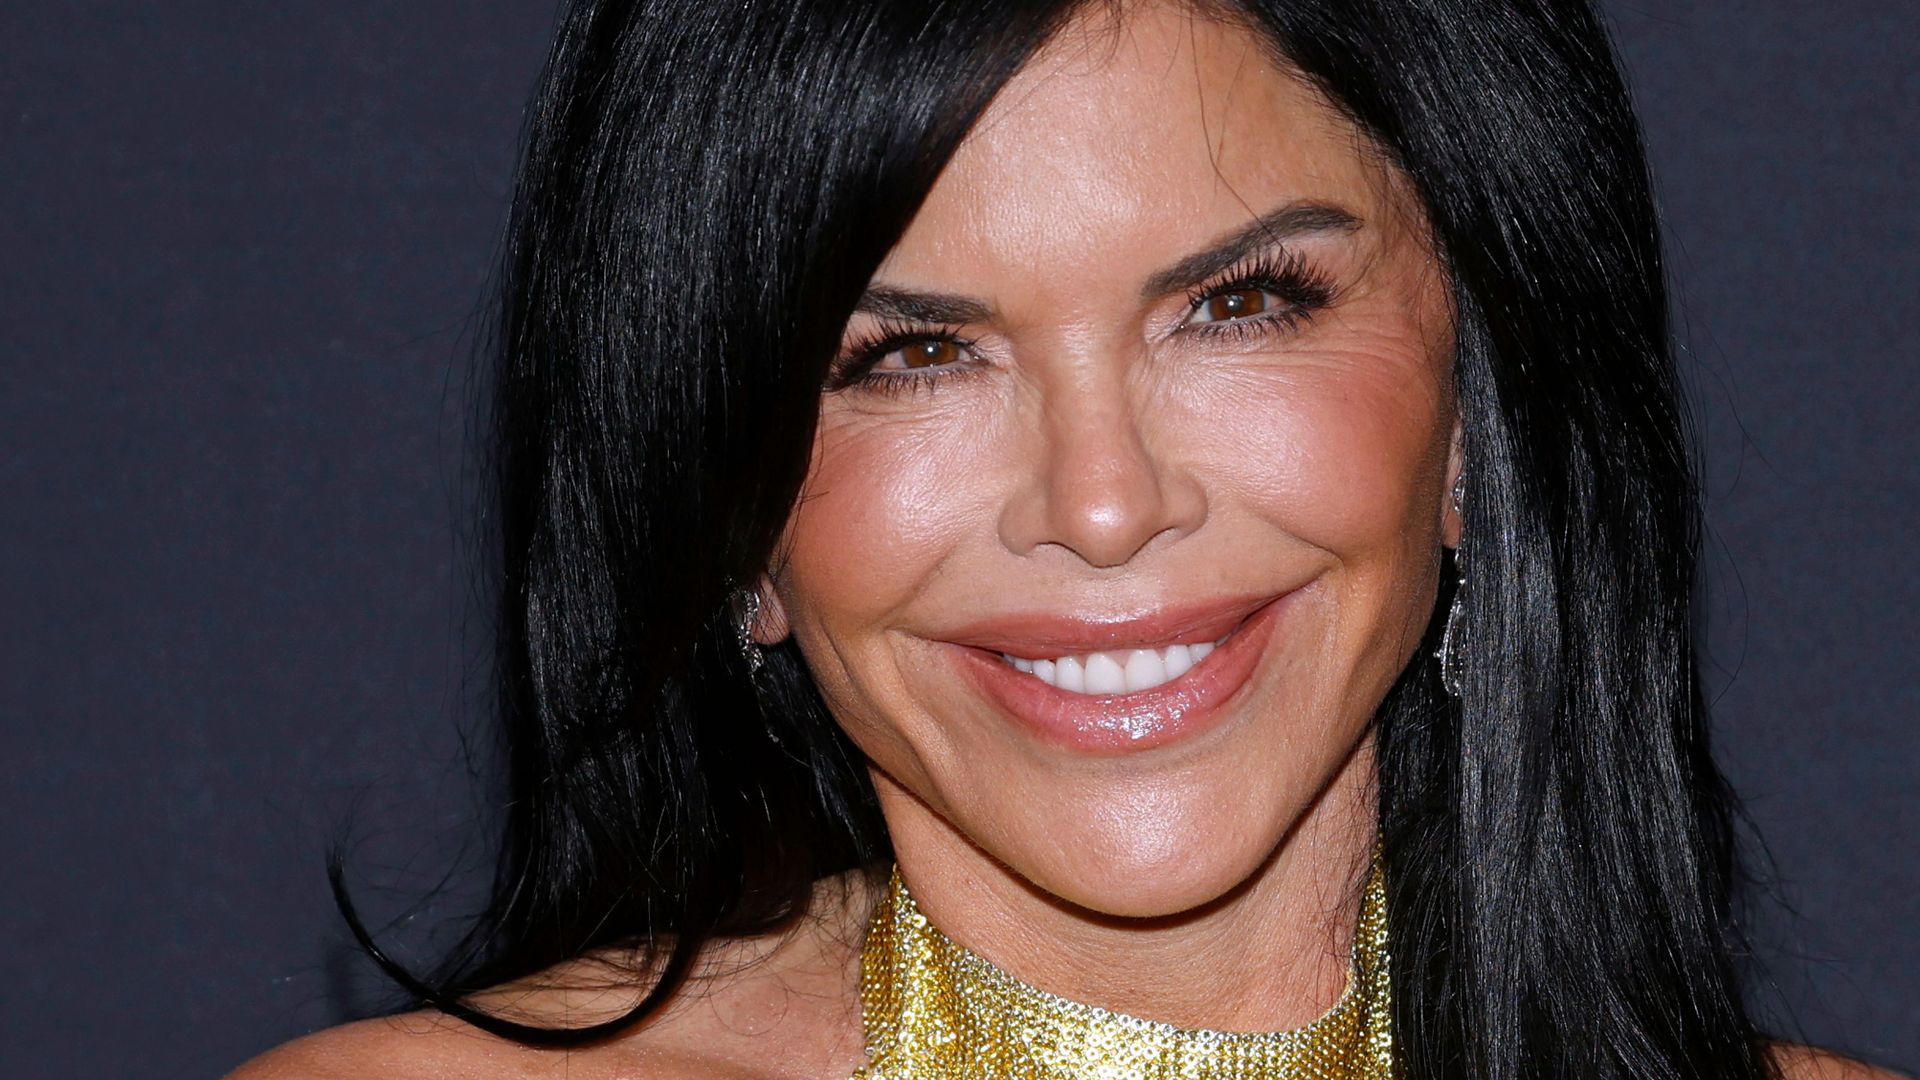 Lauren Sanchez looks incredible in yellow dress as she showcases $2.5 million engagement ring